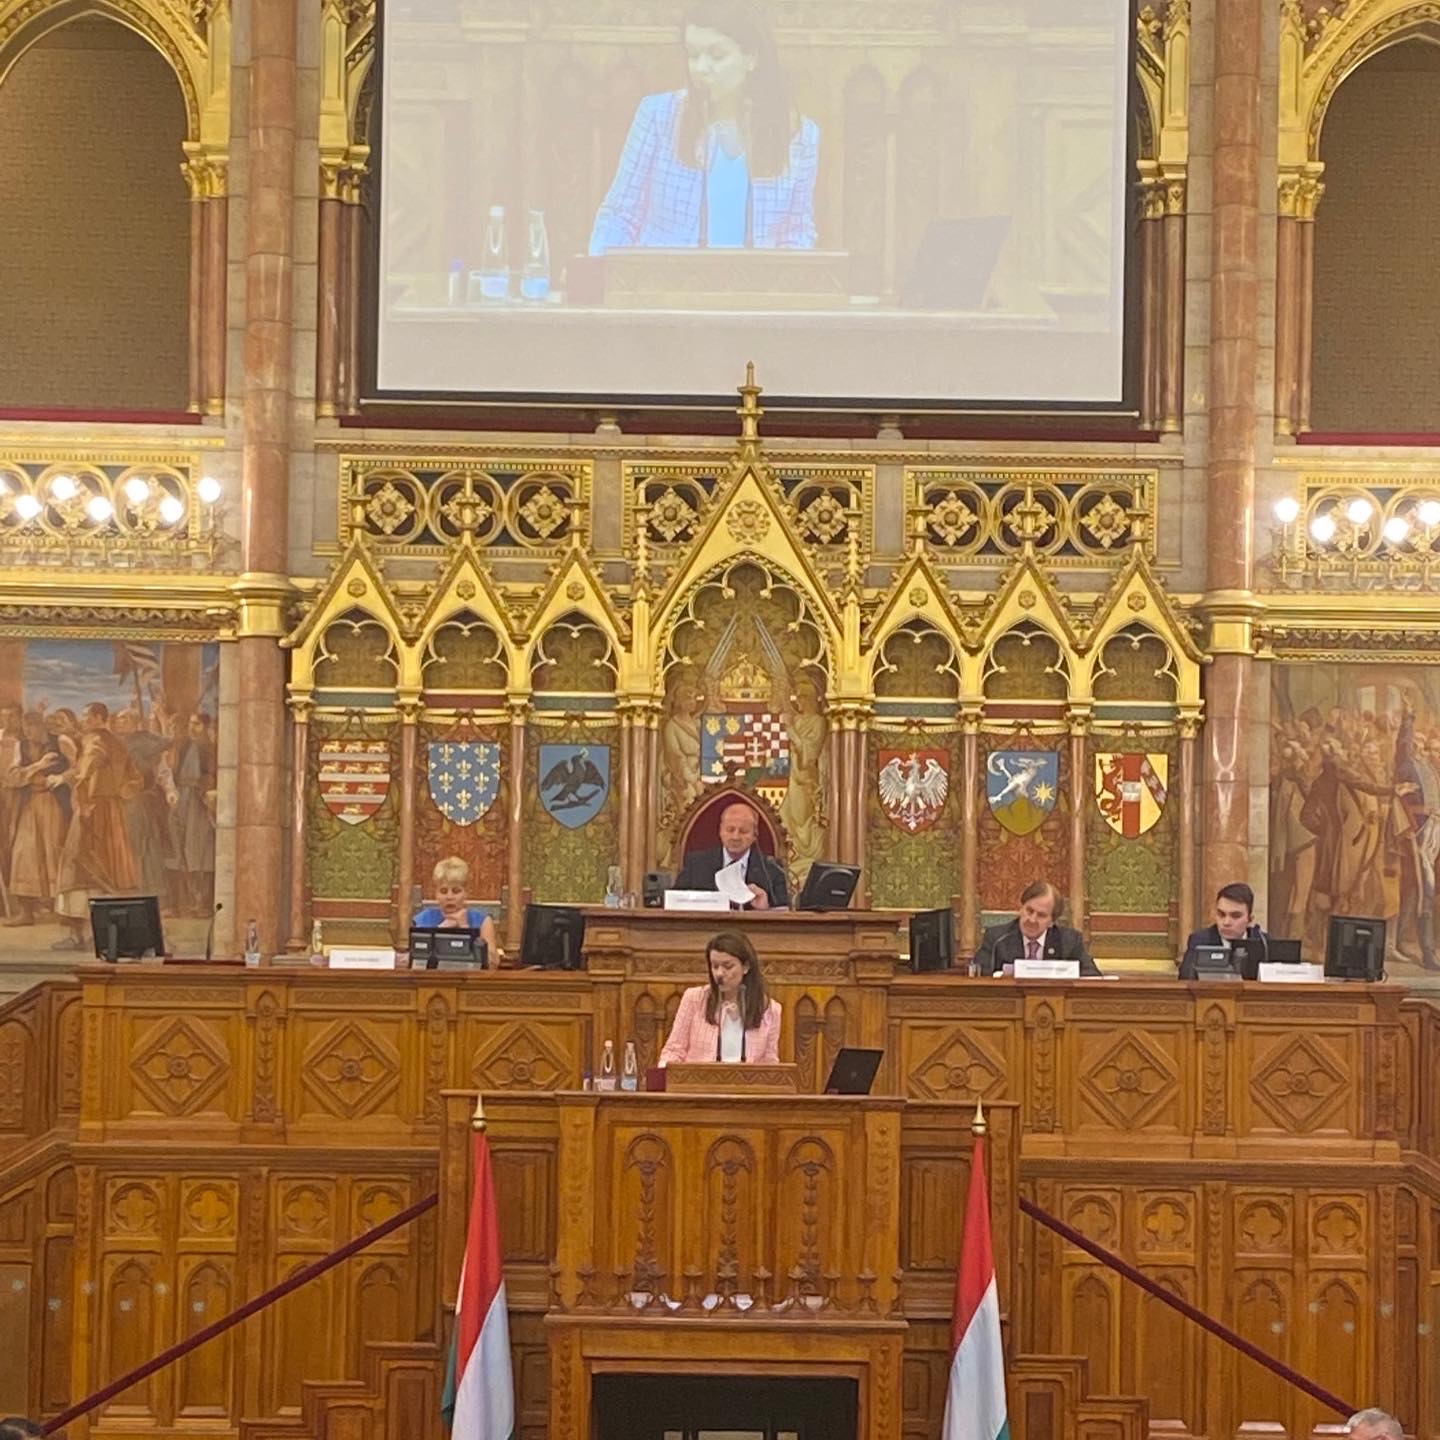 Speaking at the Hungarian Parliament about human trafficking